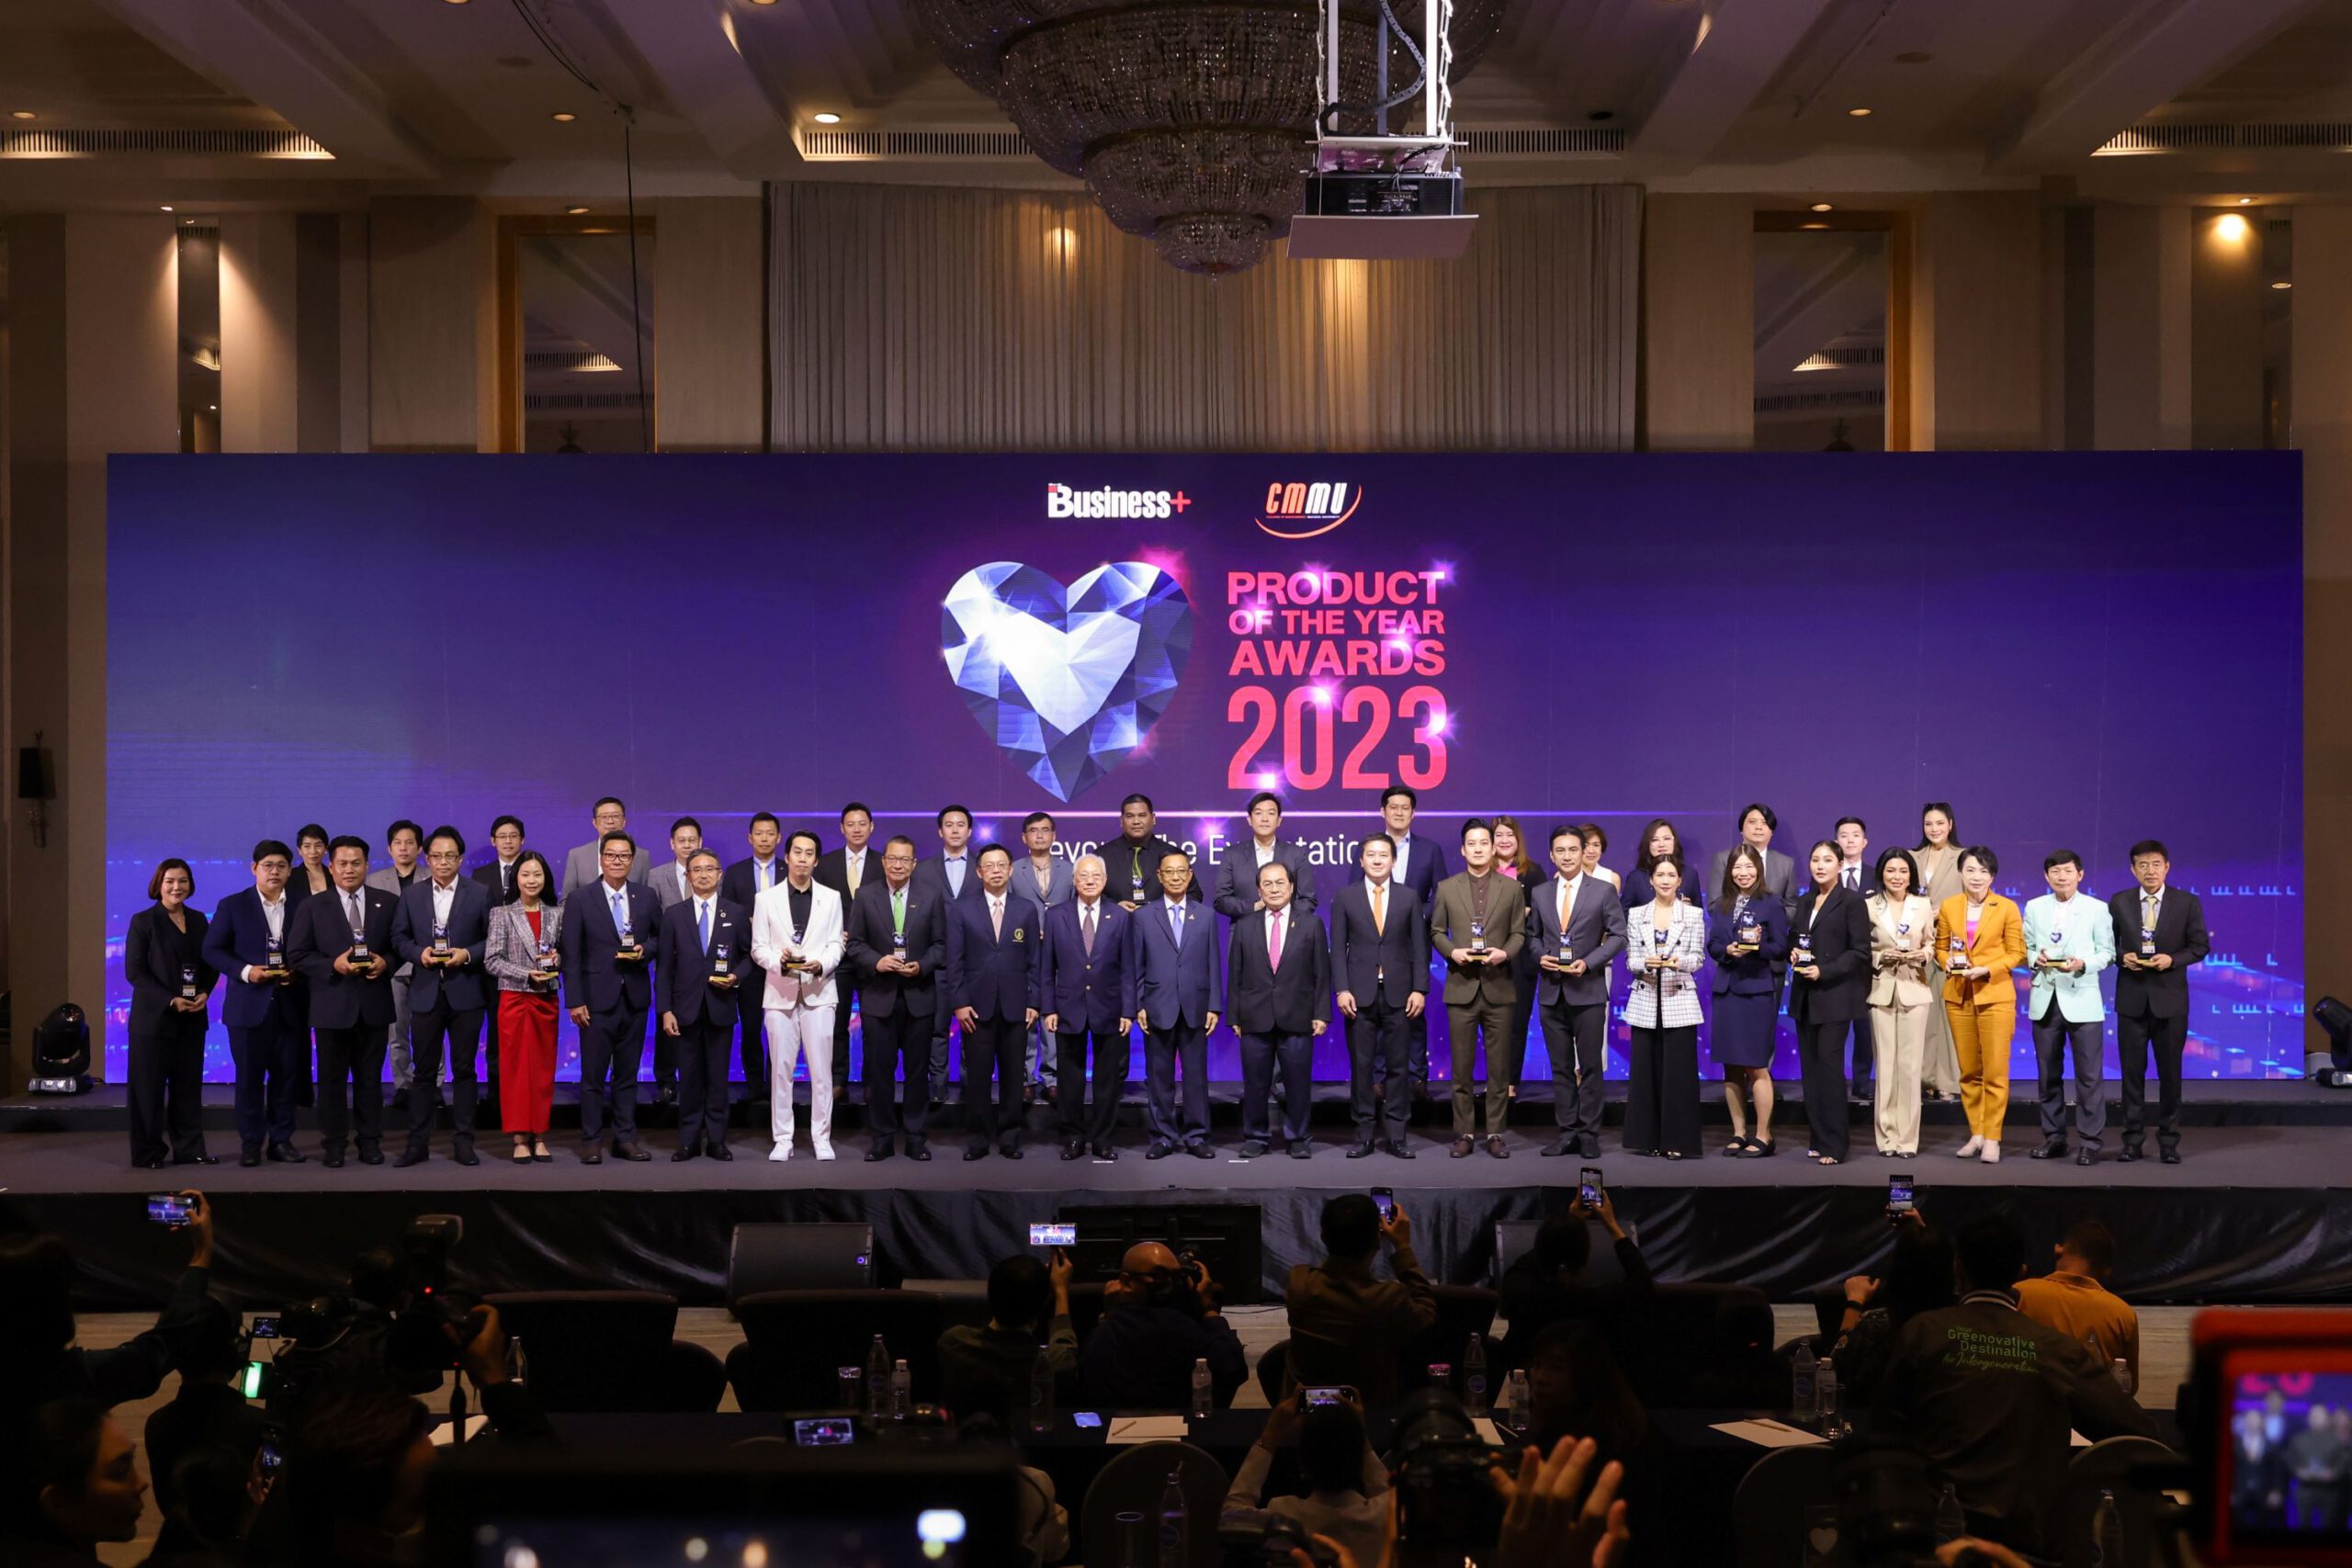 MASTER คว้ารางวัล BUSINESS+ PRODUCT OF THE YEAR AWARDS 2023